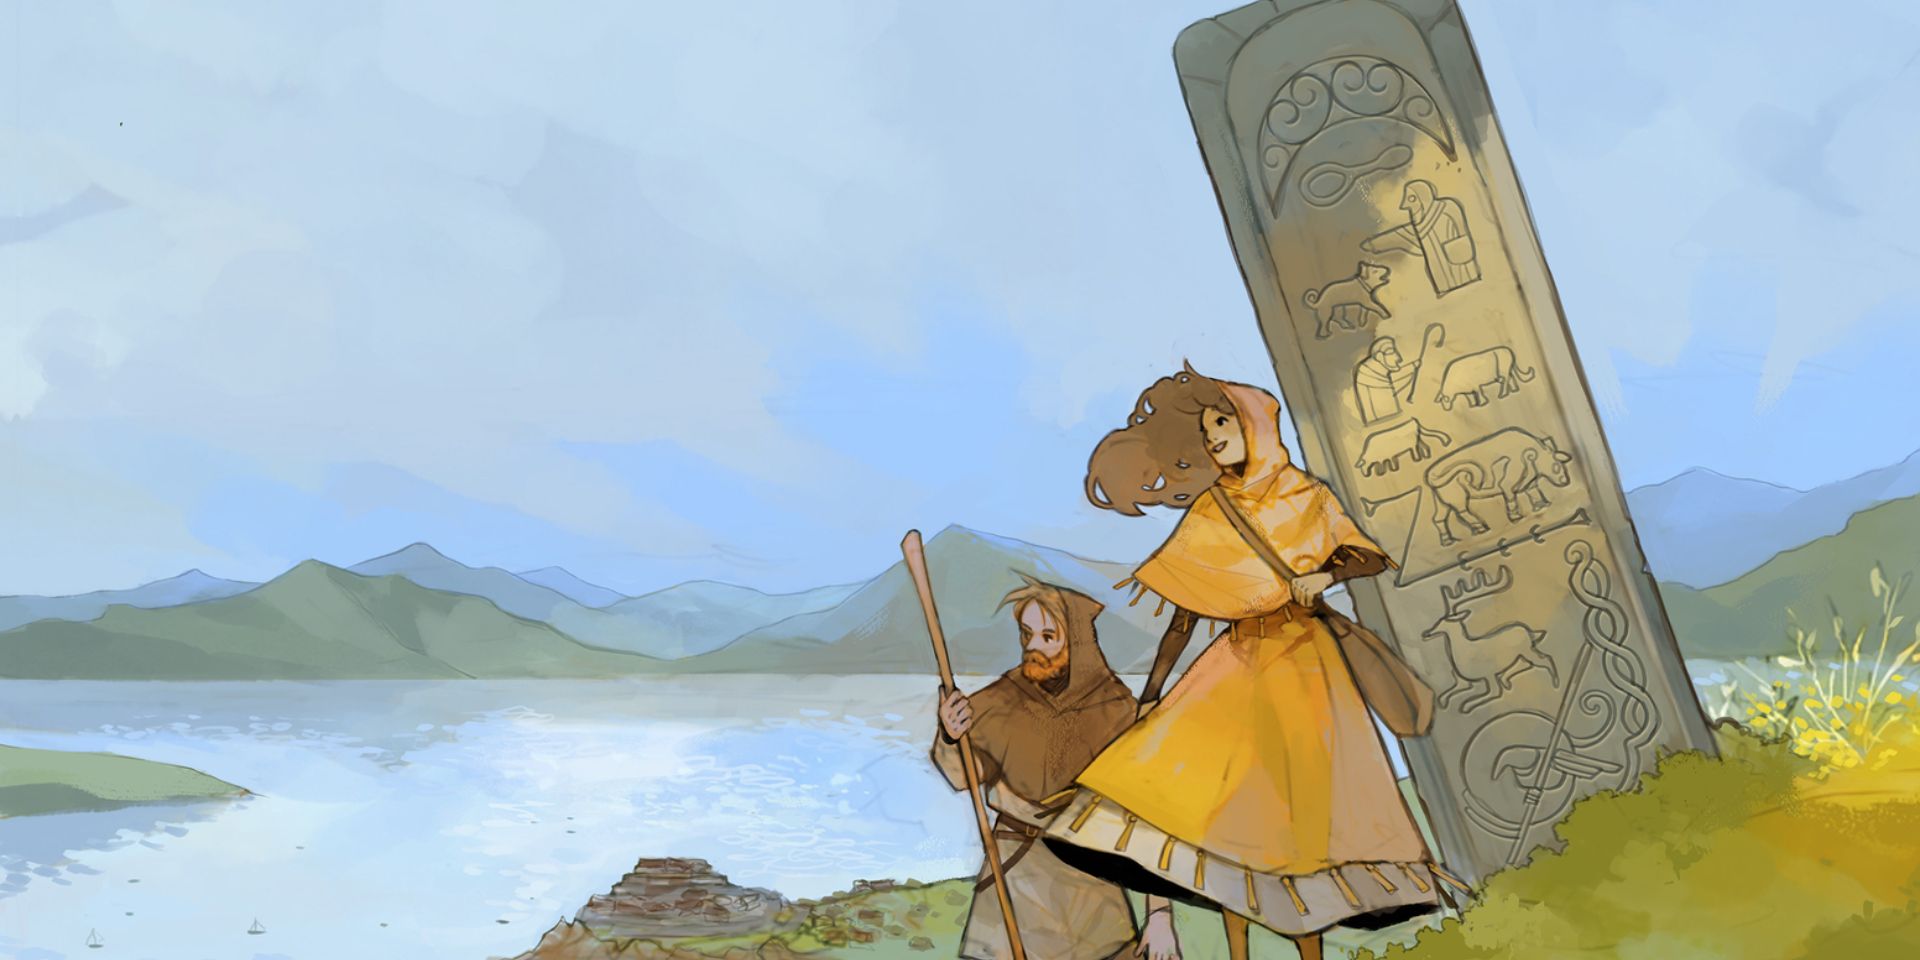 Carved In Stone puts players in a real-world tabletop RPG setting, depicting the lives of ancient Scottish Picts.